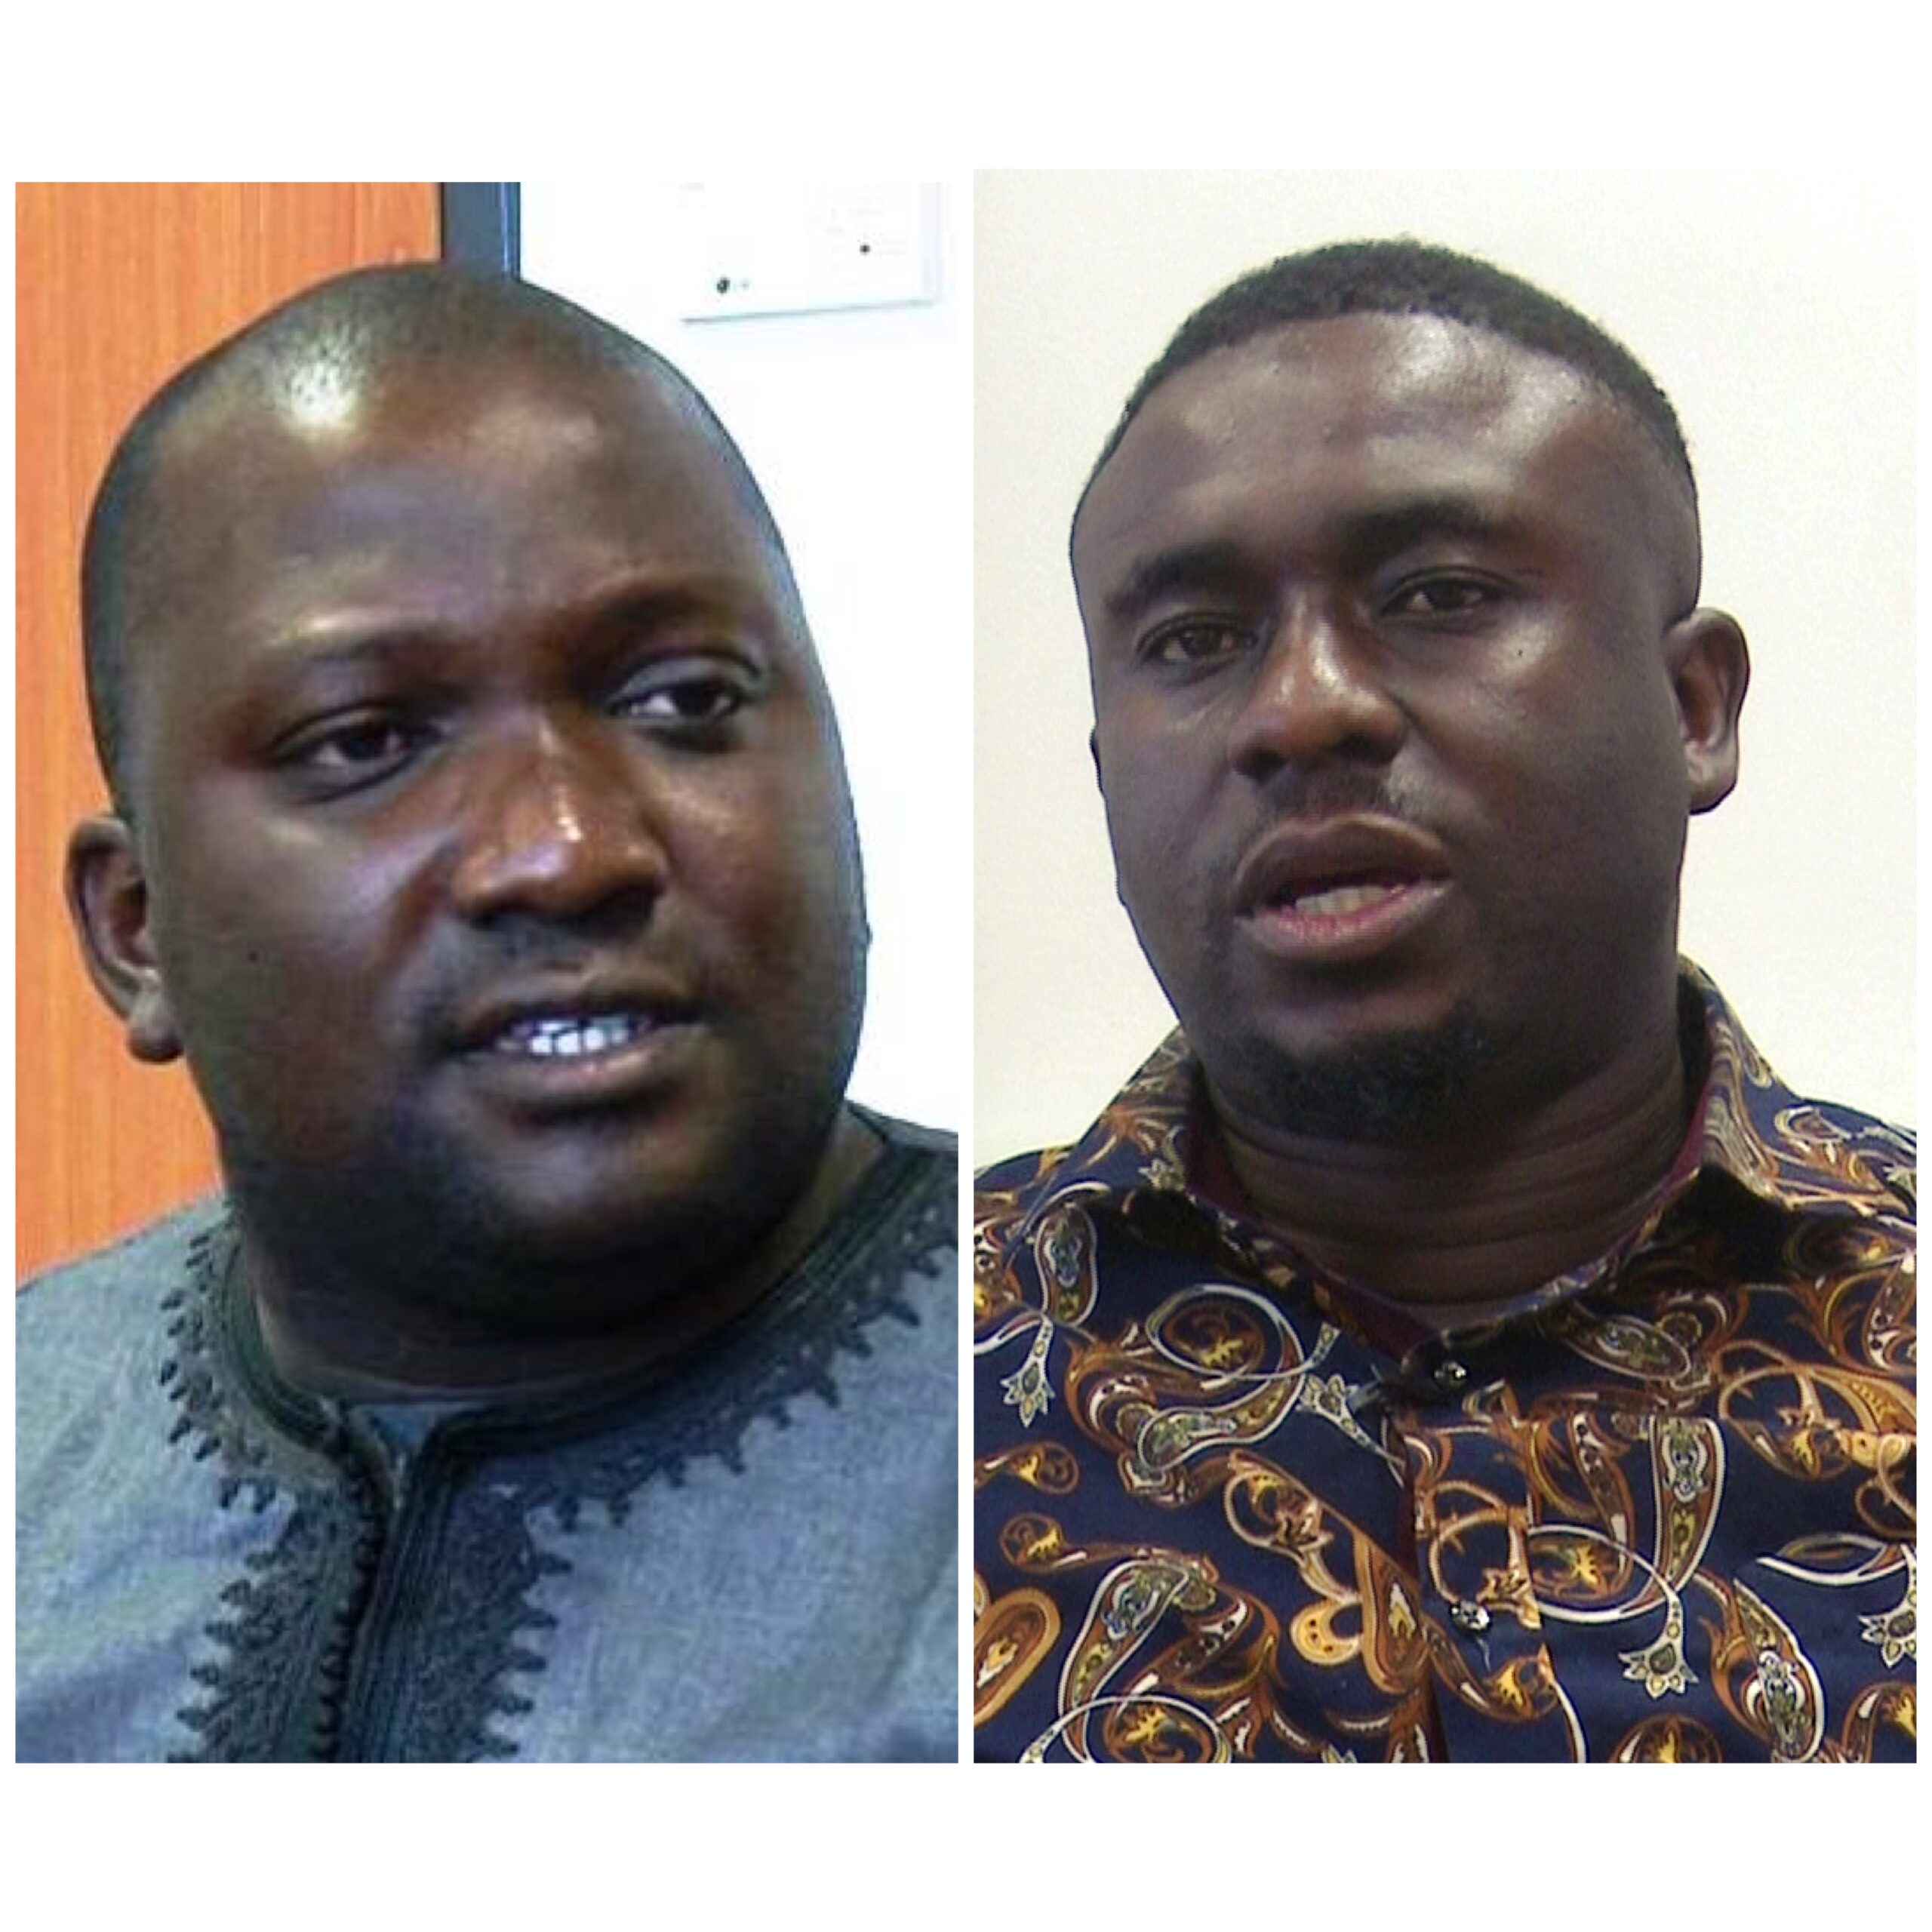 EFCC Arrests Three Suspects Over Impersonation, Name Dropping